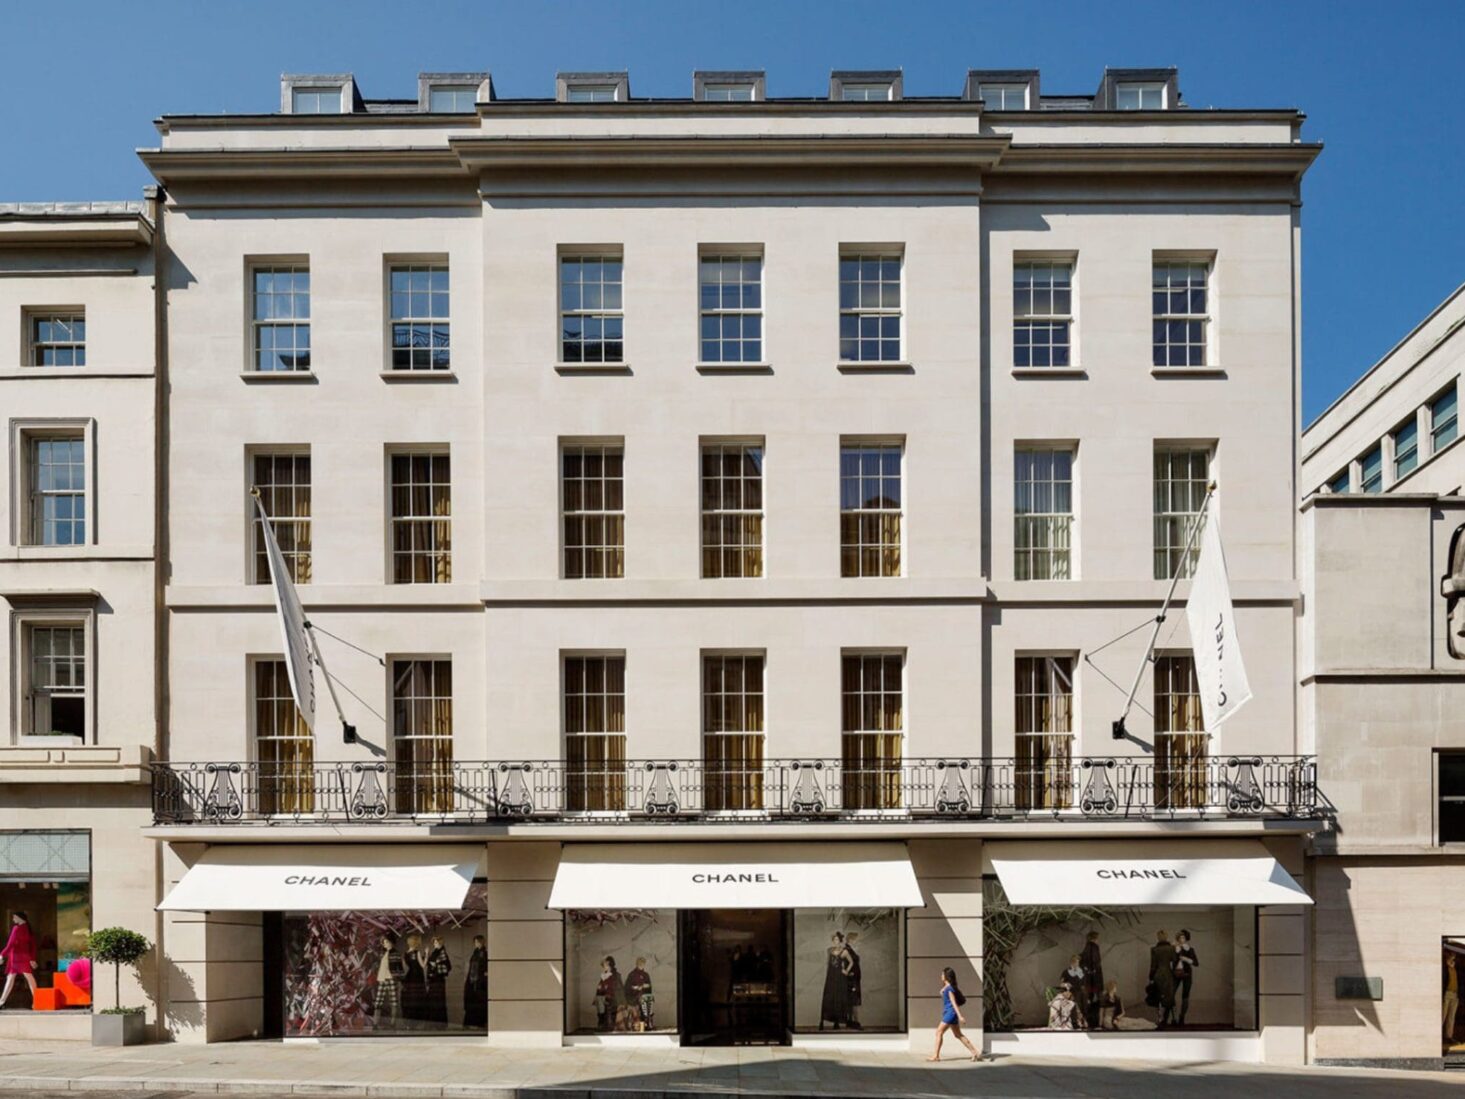 Dior opens new London boutique on Sloane Street